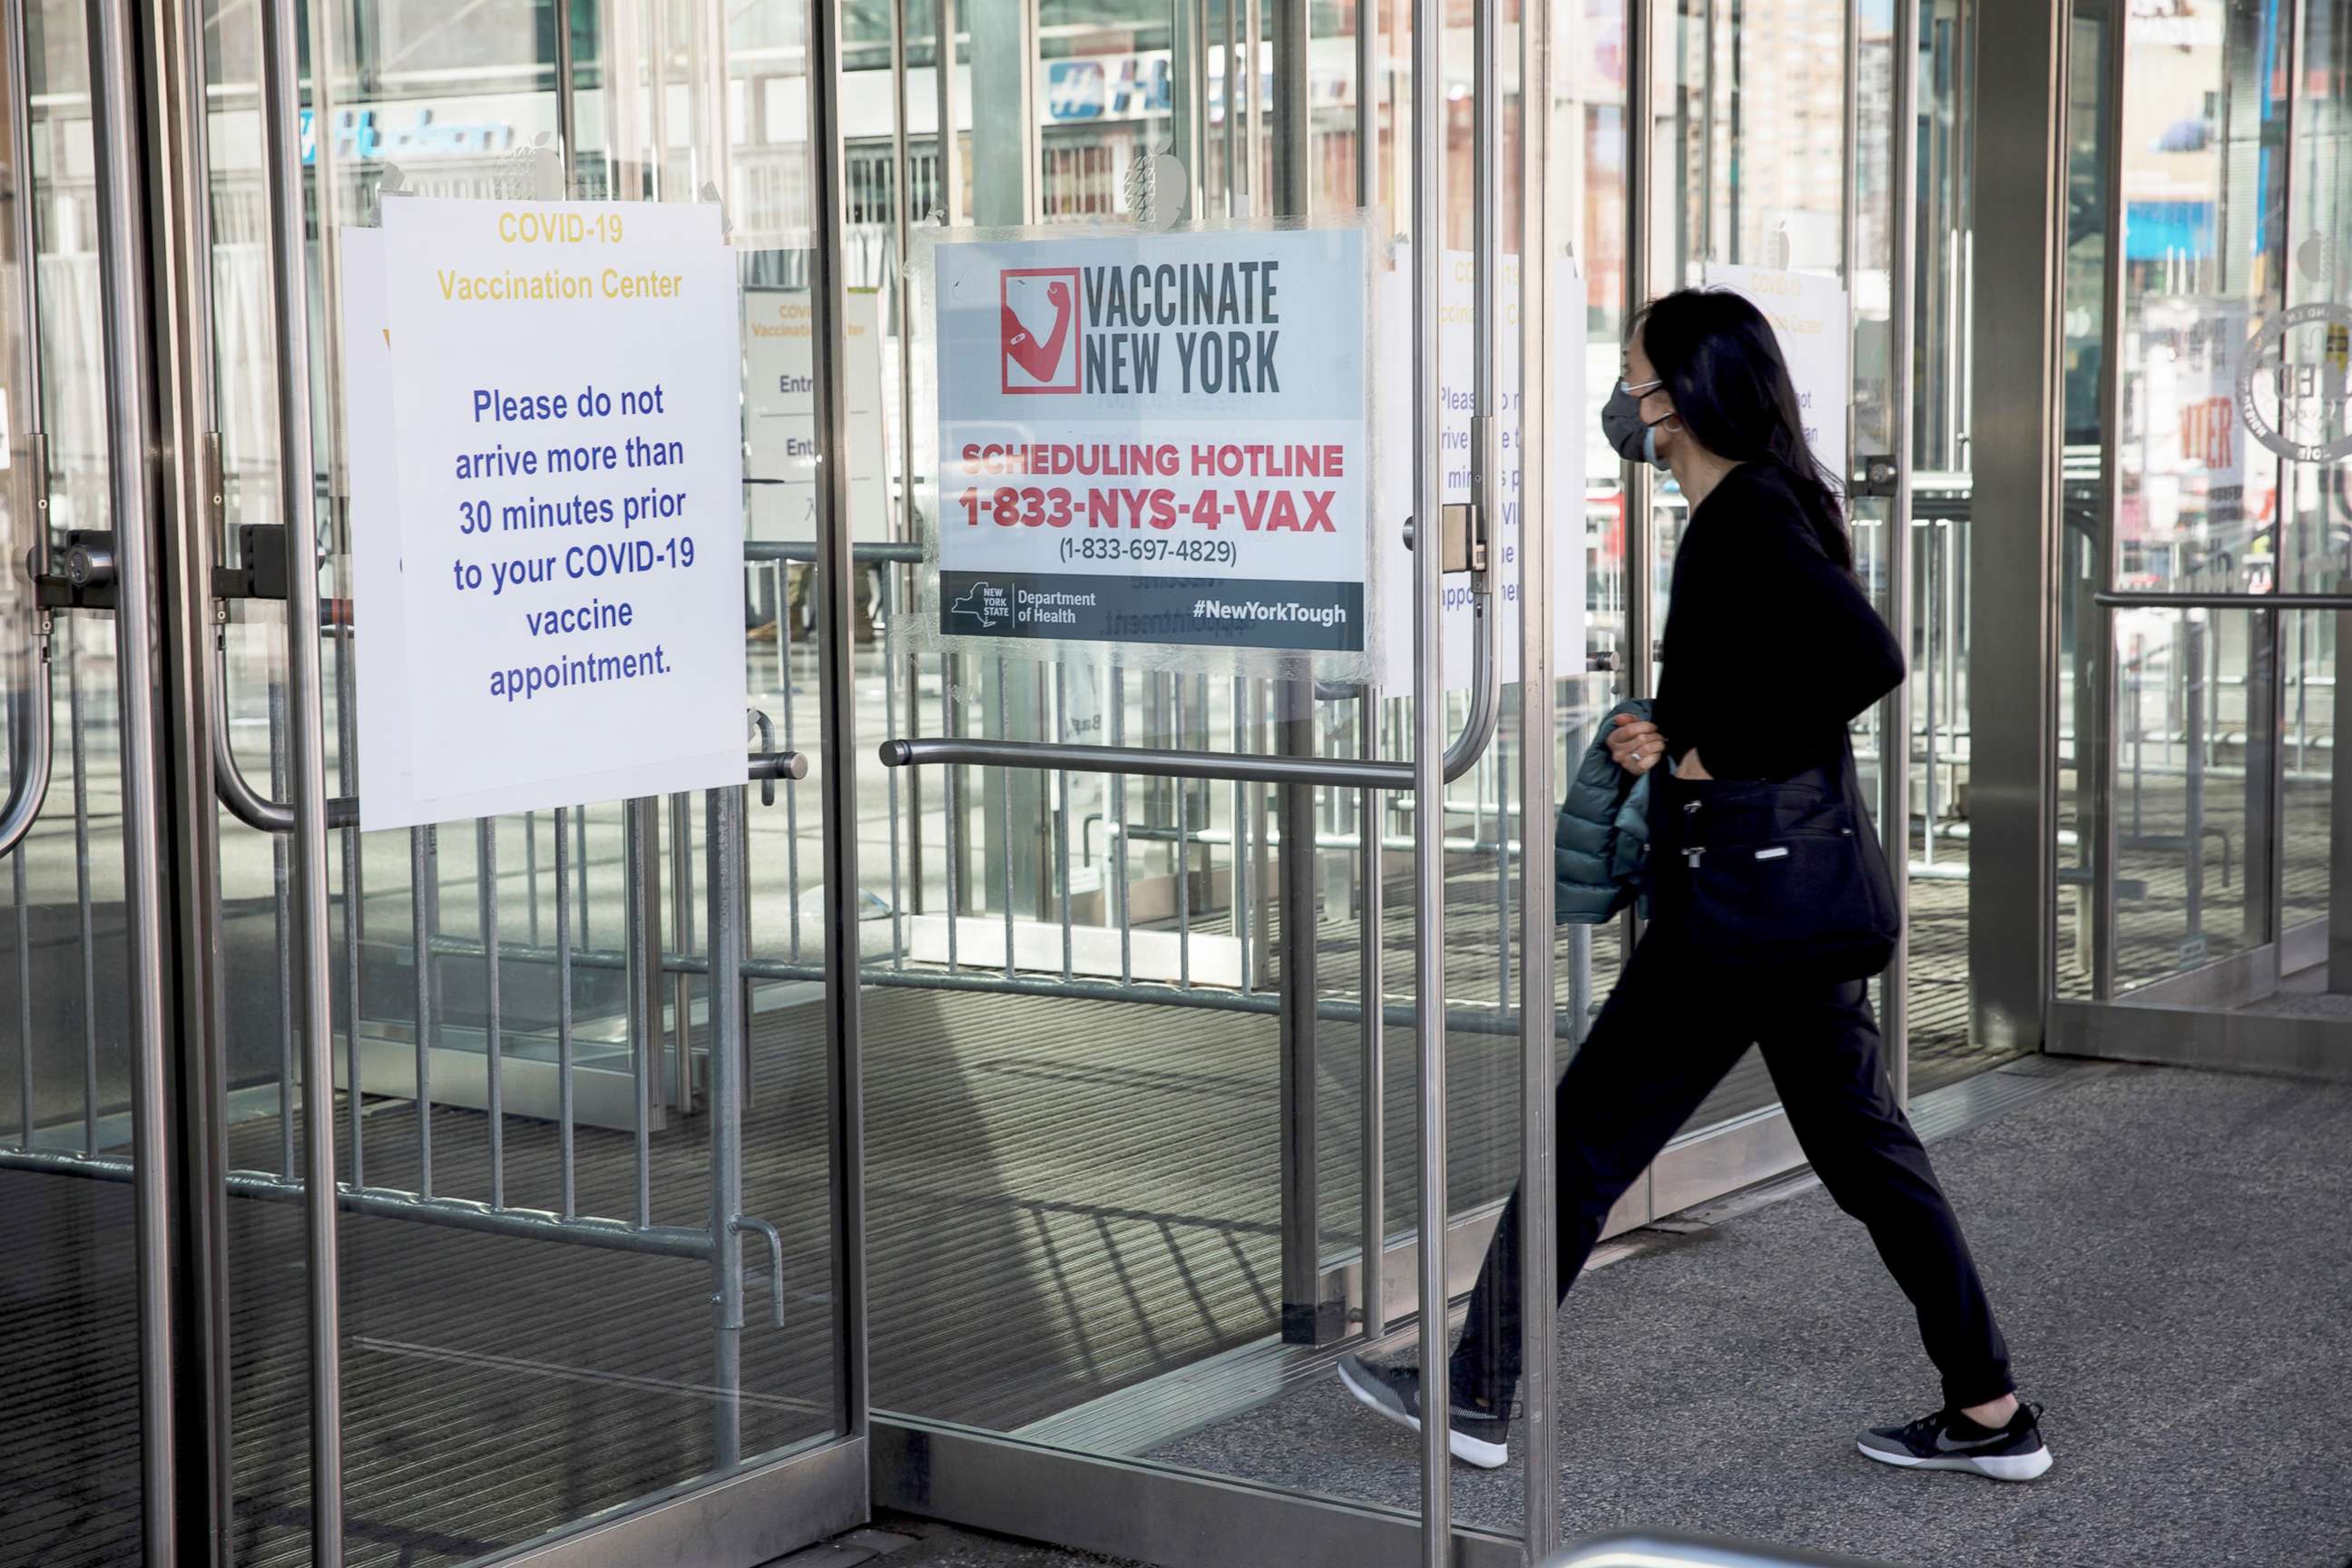 PHOTO: Signage directs visitors to the vaccination site at the Javits Center in New York, April 6, 2021.